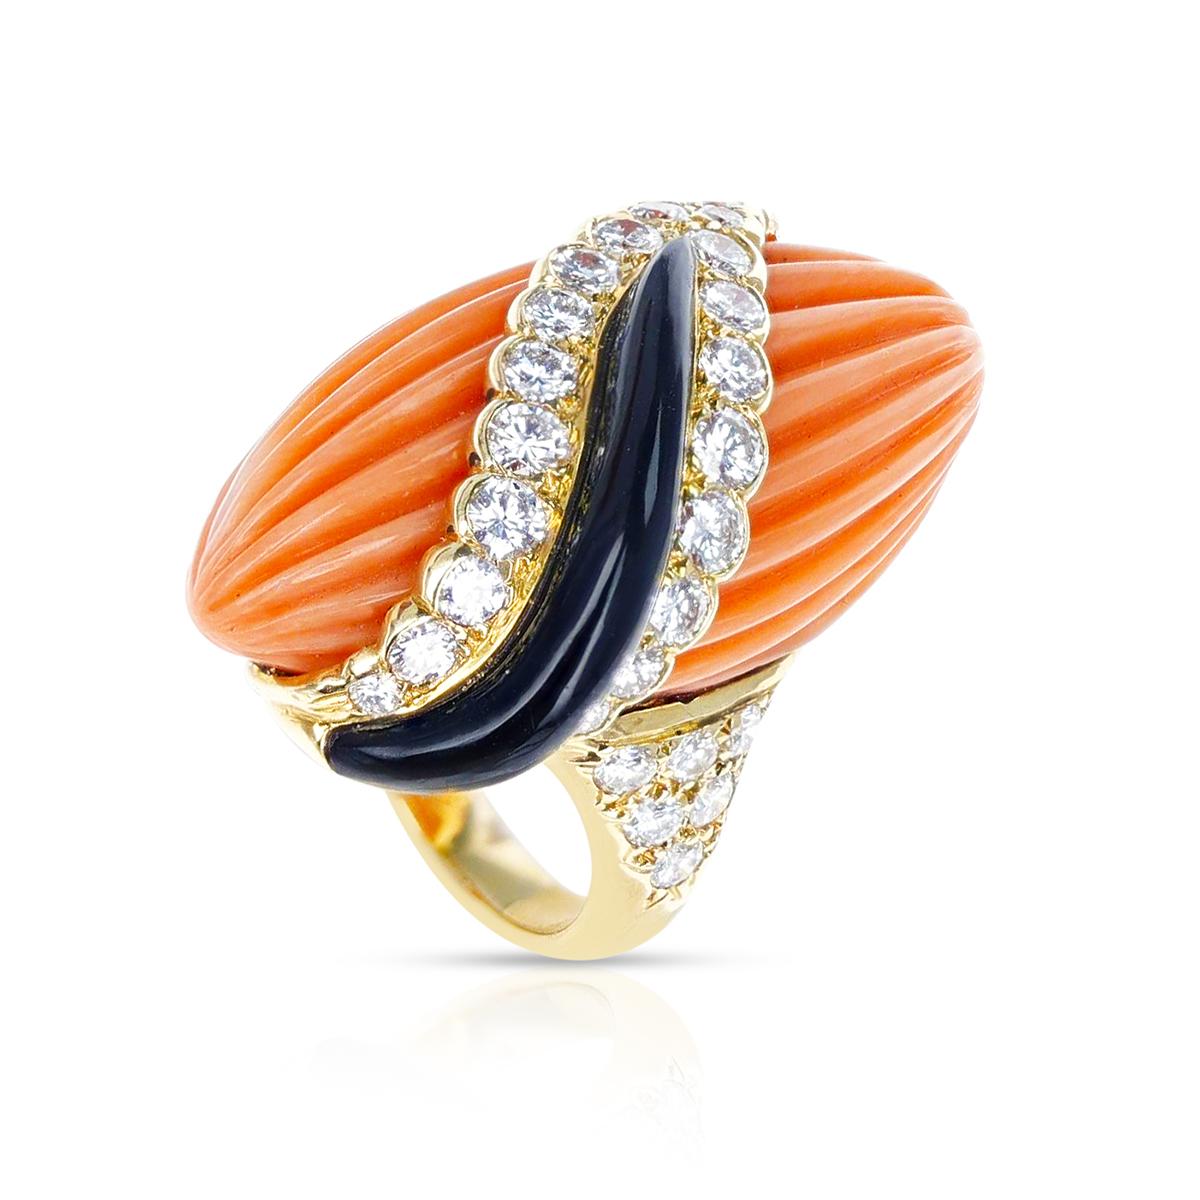 A French Andre Vassort Carved Coral, Onyx, and Diamond Ring. Total weight: 16.30 grams. Ring Size US 5.25.